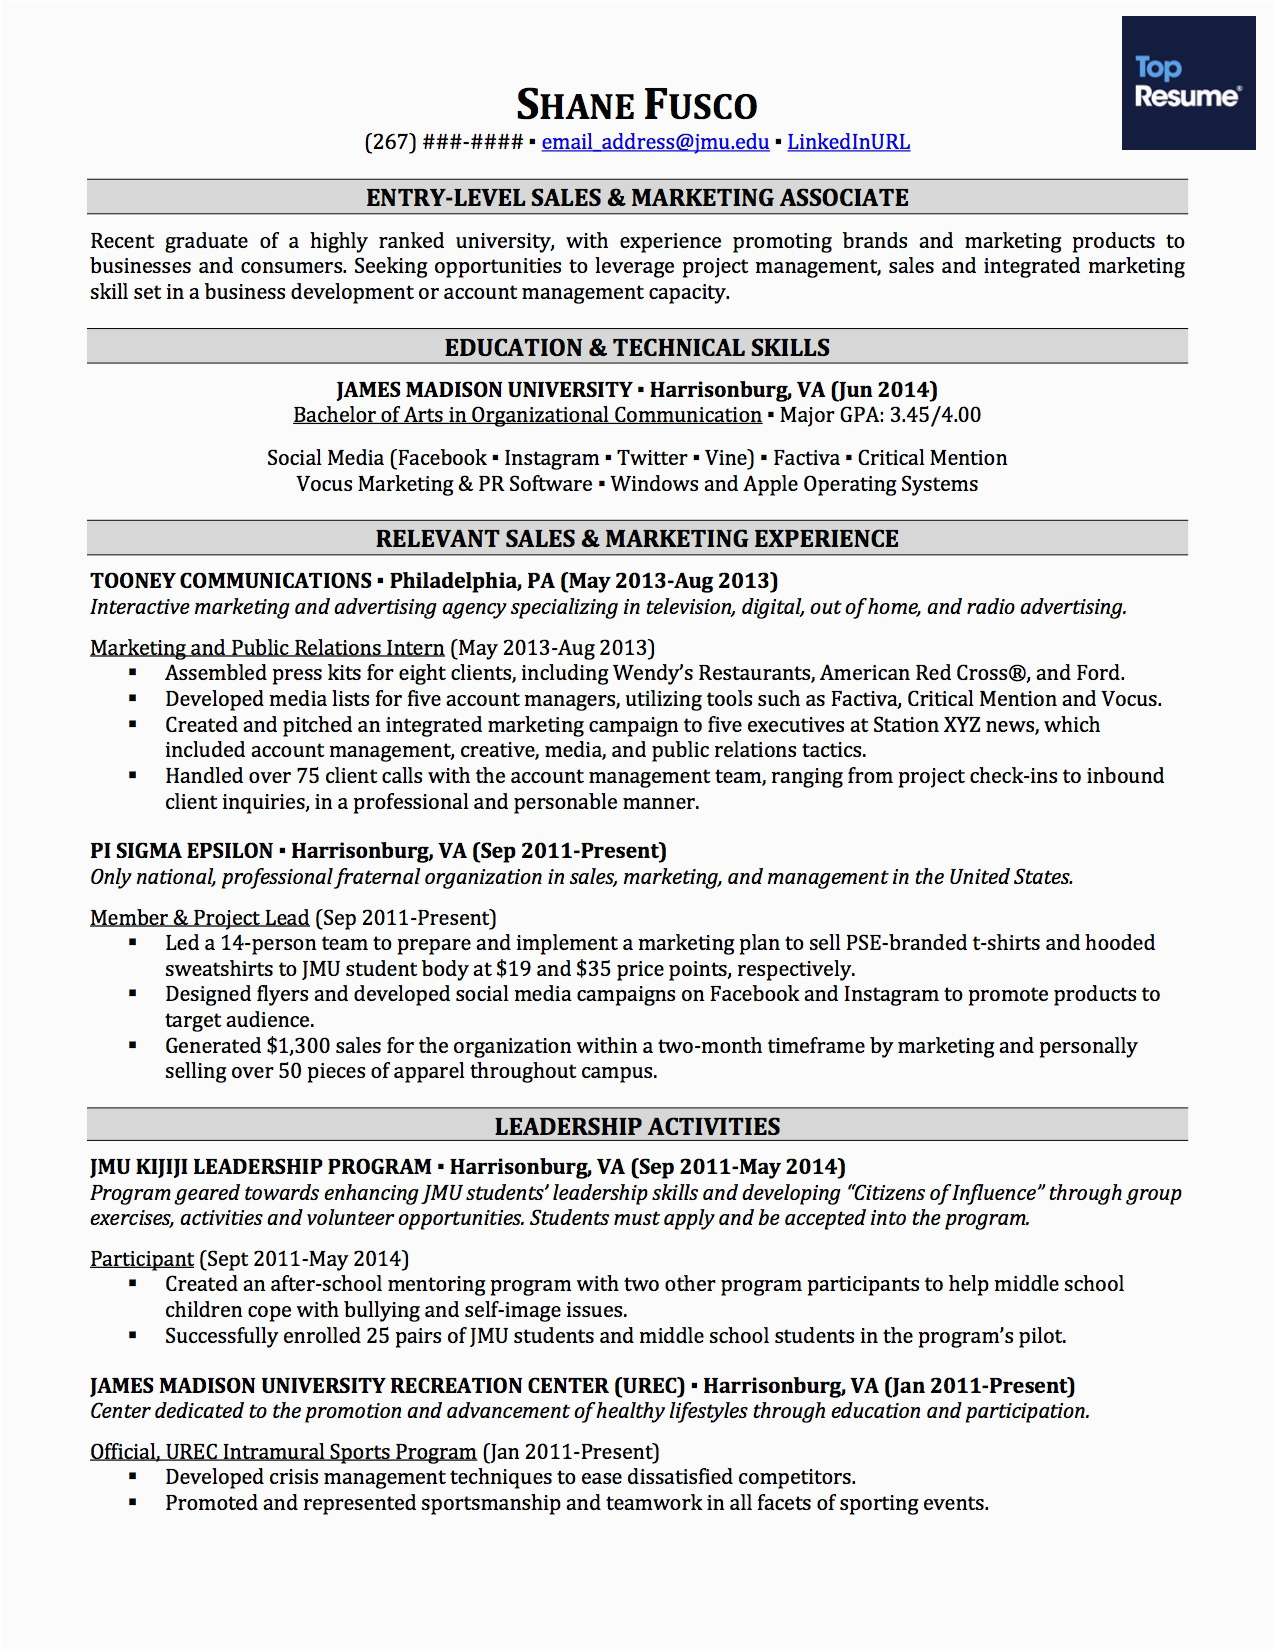 Sample Objectives for Resume with No Experience How to Write A Resume with No Experience